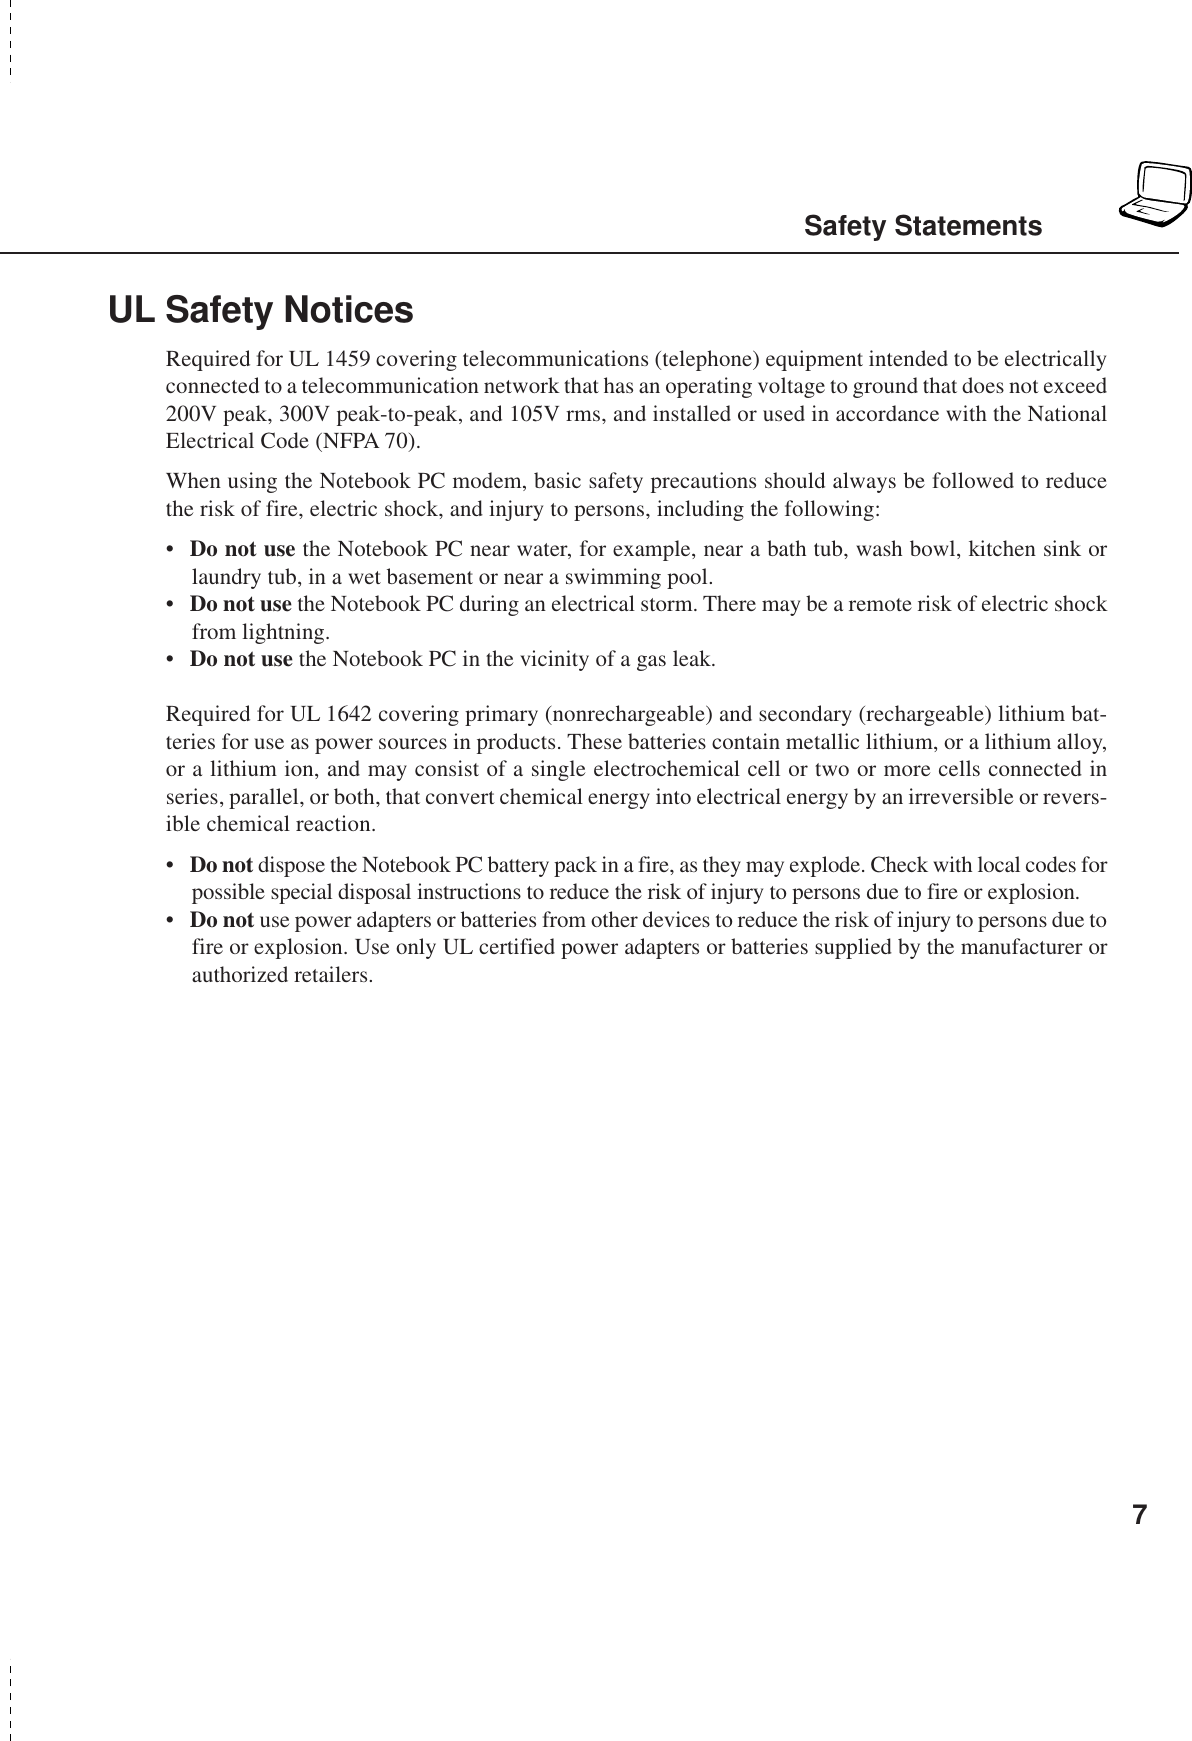 7UL Safety NoticesRequired for UL 1459 covering telecommunications (telephone) equipment intended to be electricallyconnected to a telecommunication network that has an operating voltage to ground that does not exceed200V peak, 300V peak-to-peak, and 105V rms, and installed or used in accordance with the NationalElectrical Code (NFPA 70).When using the Notebook PC modem, basic safety precautions should always be followed to reducethe risk of fire, electric shock, and injury to persons, including the following:•Do not use the Notebook PC near water, for example, near a bath tub, wash bowl, kitchen sink orlaundry tub, in a wet basement or near a swimming pool.•Do not use the Notebook PC during an electrical storm. There may be a remote risk of electric shockfrom lightning.•Do not use the Notebook PC in the vicinity of a gas leak.Required for UL 1642 covering primary (nonrechargeable) and secondary (rechargeable) lithium bat-teries for use as power sources in products. These batteries contain metallic lithium, or a lithium alloy,or a lithium ion, and may consist of a single electrochemical cell or two or more cells connected inseries, parallel, or both, that convert chemical energy into electrical energy by an irreversible or revers-ible chemical reaction.•Do not dispose the Notebook PC battery pack in a fire, as they may explode. Check with local codes forpossible special disposal instructions to reduce the risk of injury to persons due to fire or explosion.•Do not use power adapters or batteries from other devices to reduce the risk of injury to persons due tofire or explosion. Use only UL certified power adapters or batteries supplied by the manufacturer orauthorized retailers.Safety Statements